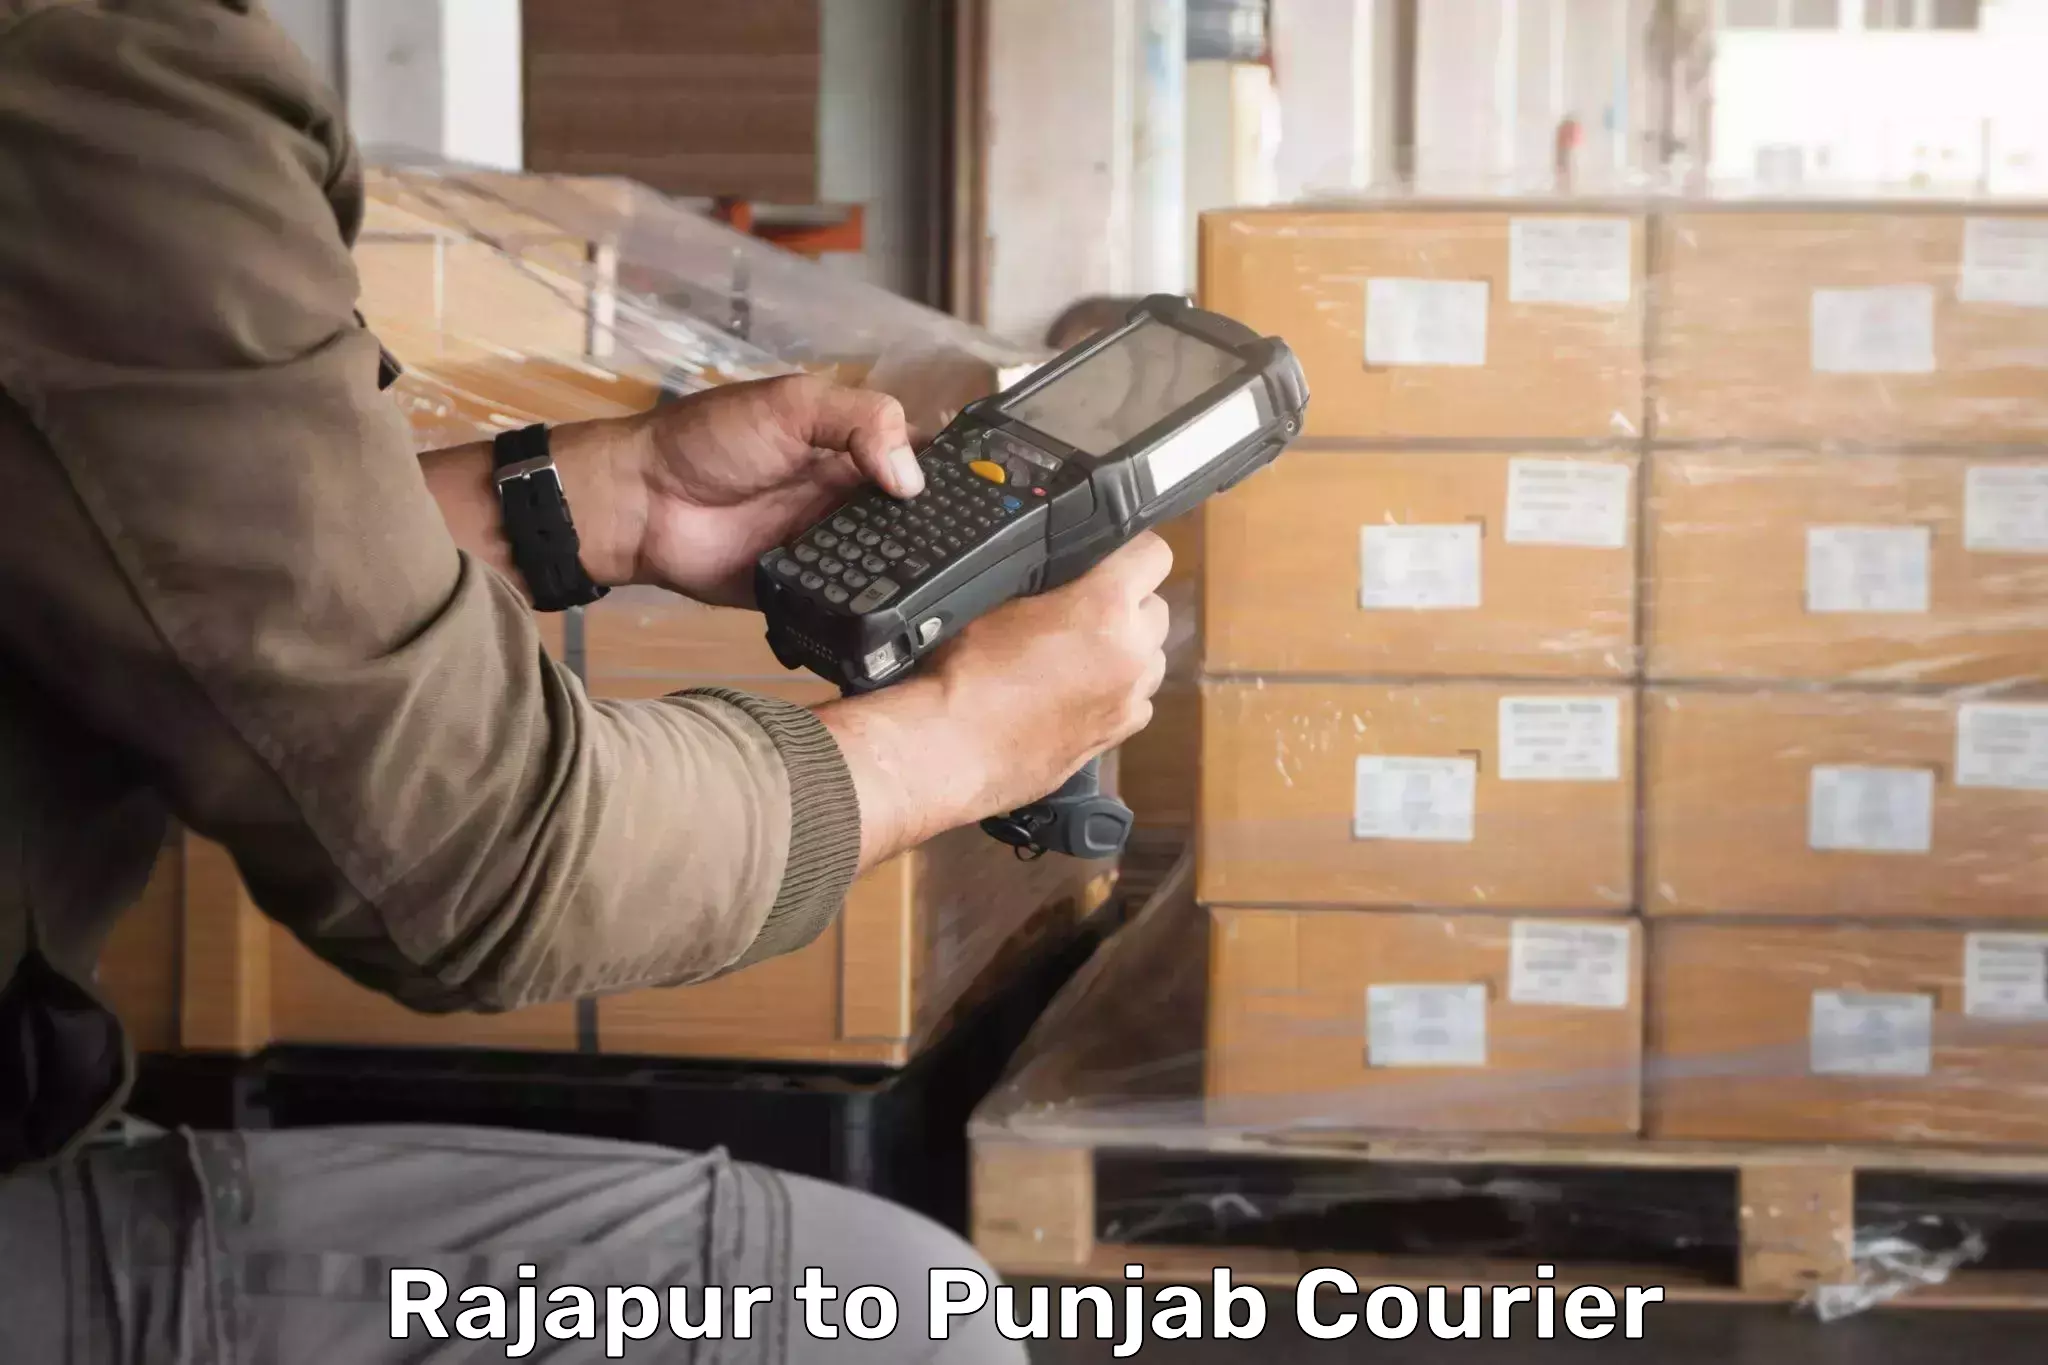 Global shipping networks Rajapur to Pathankot